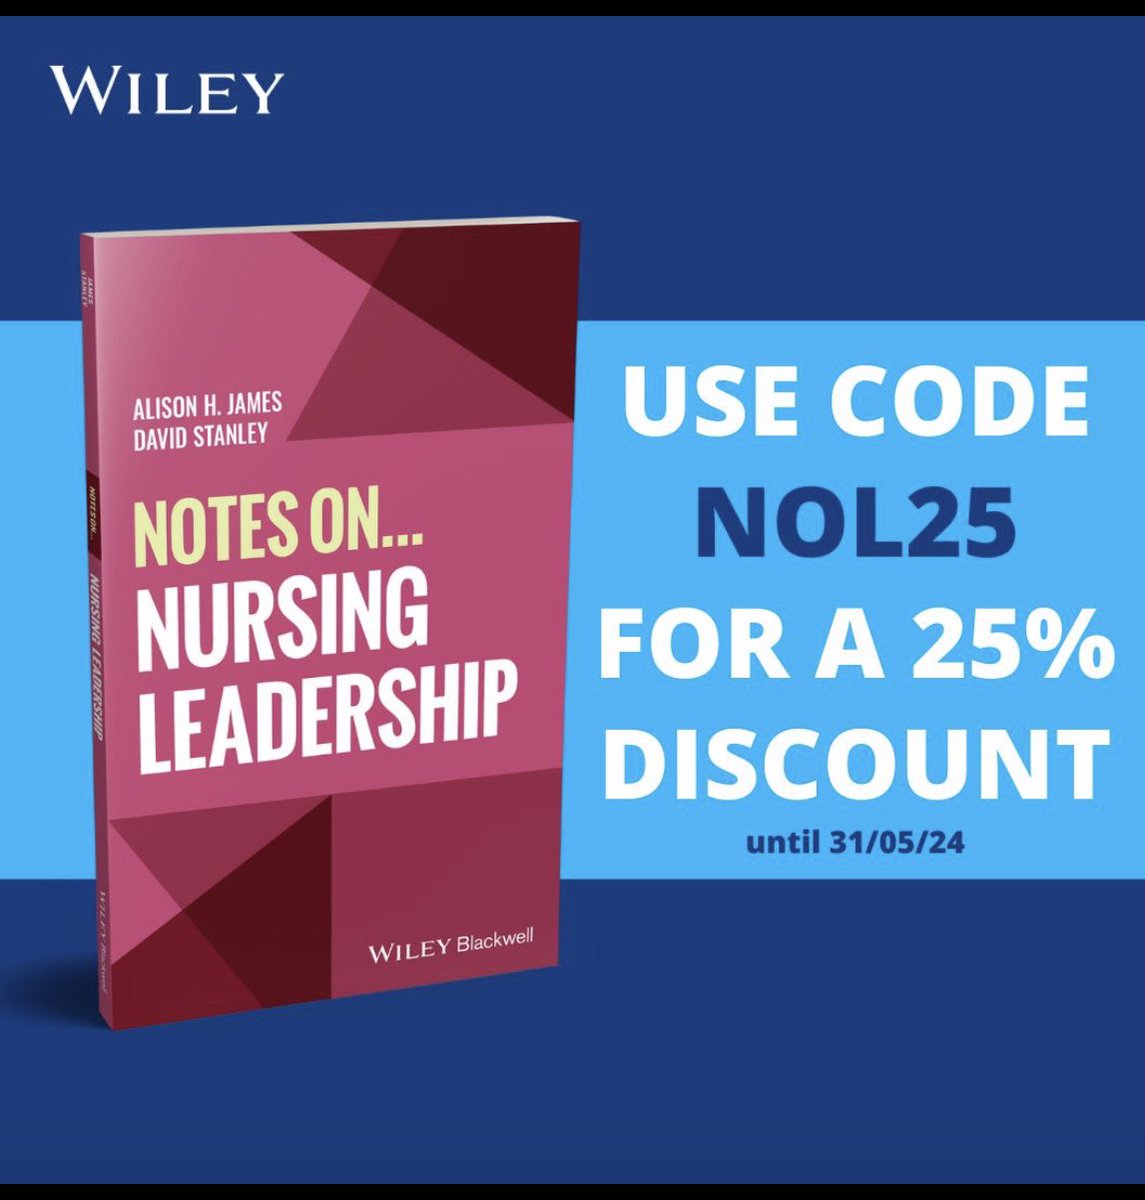 second title in this new Notes On... series to publication. Leadership development

Enjoy a 25% discount for a limited time, only at wiley.com.

lnkd.in/eD8EFb5M

#Nursingleadership